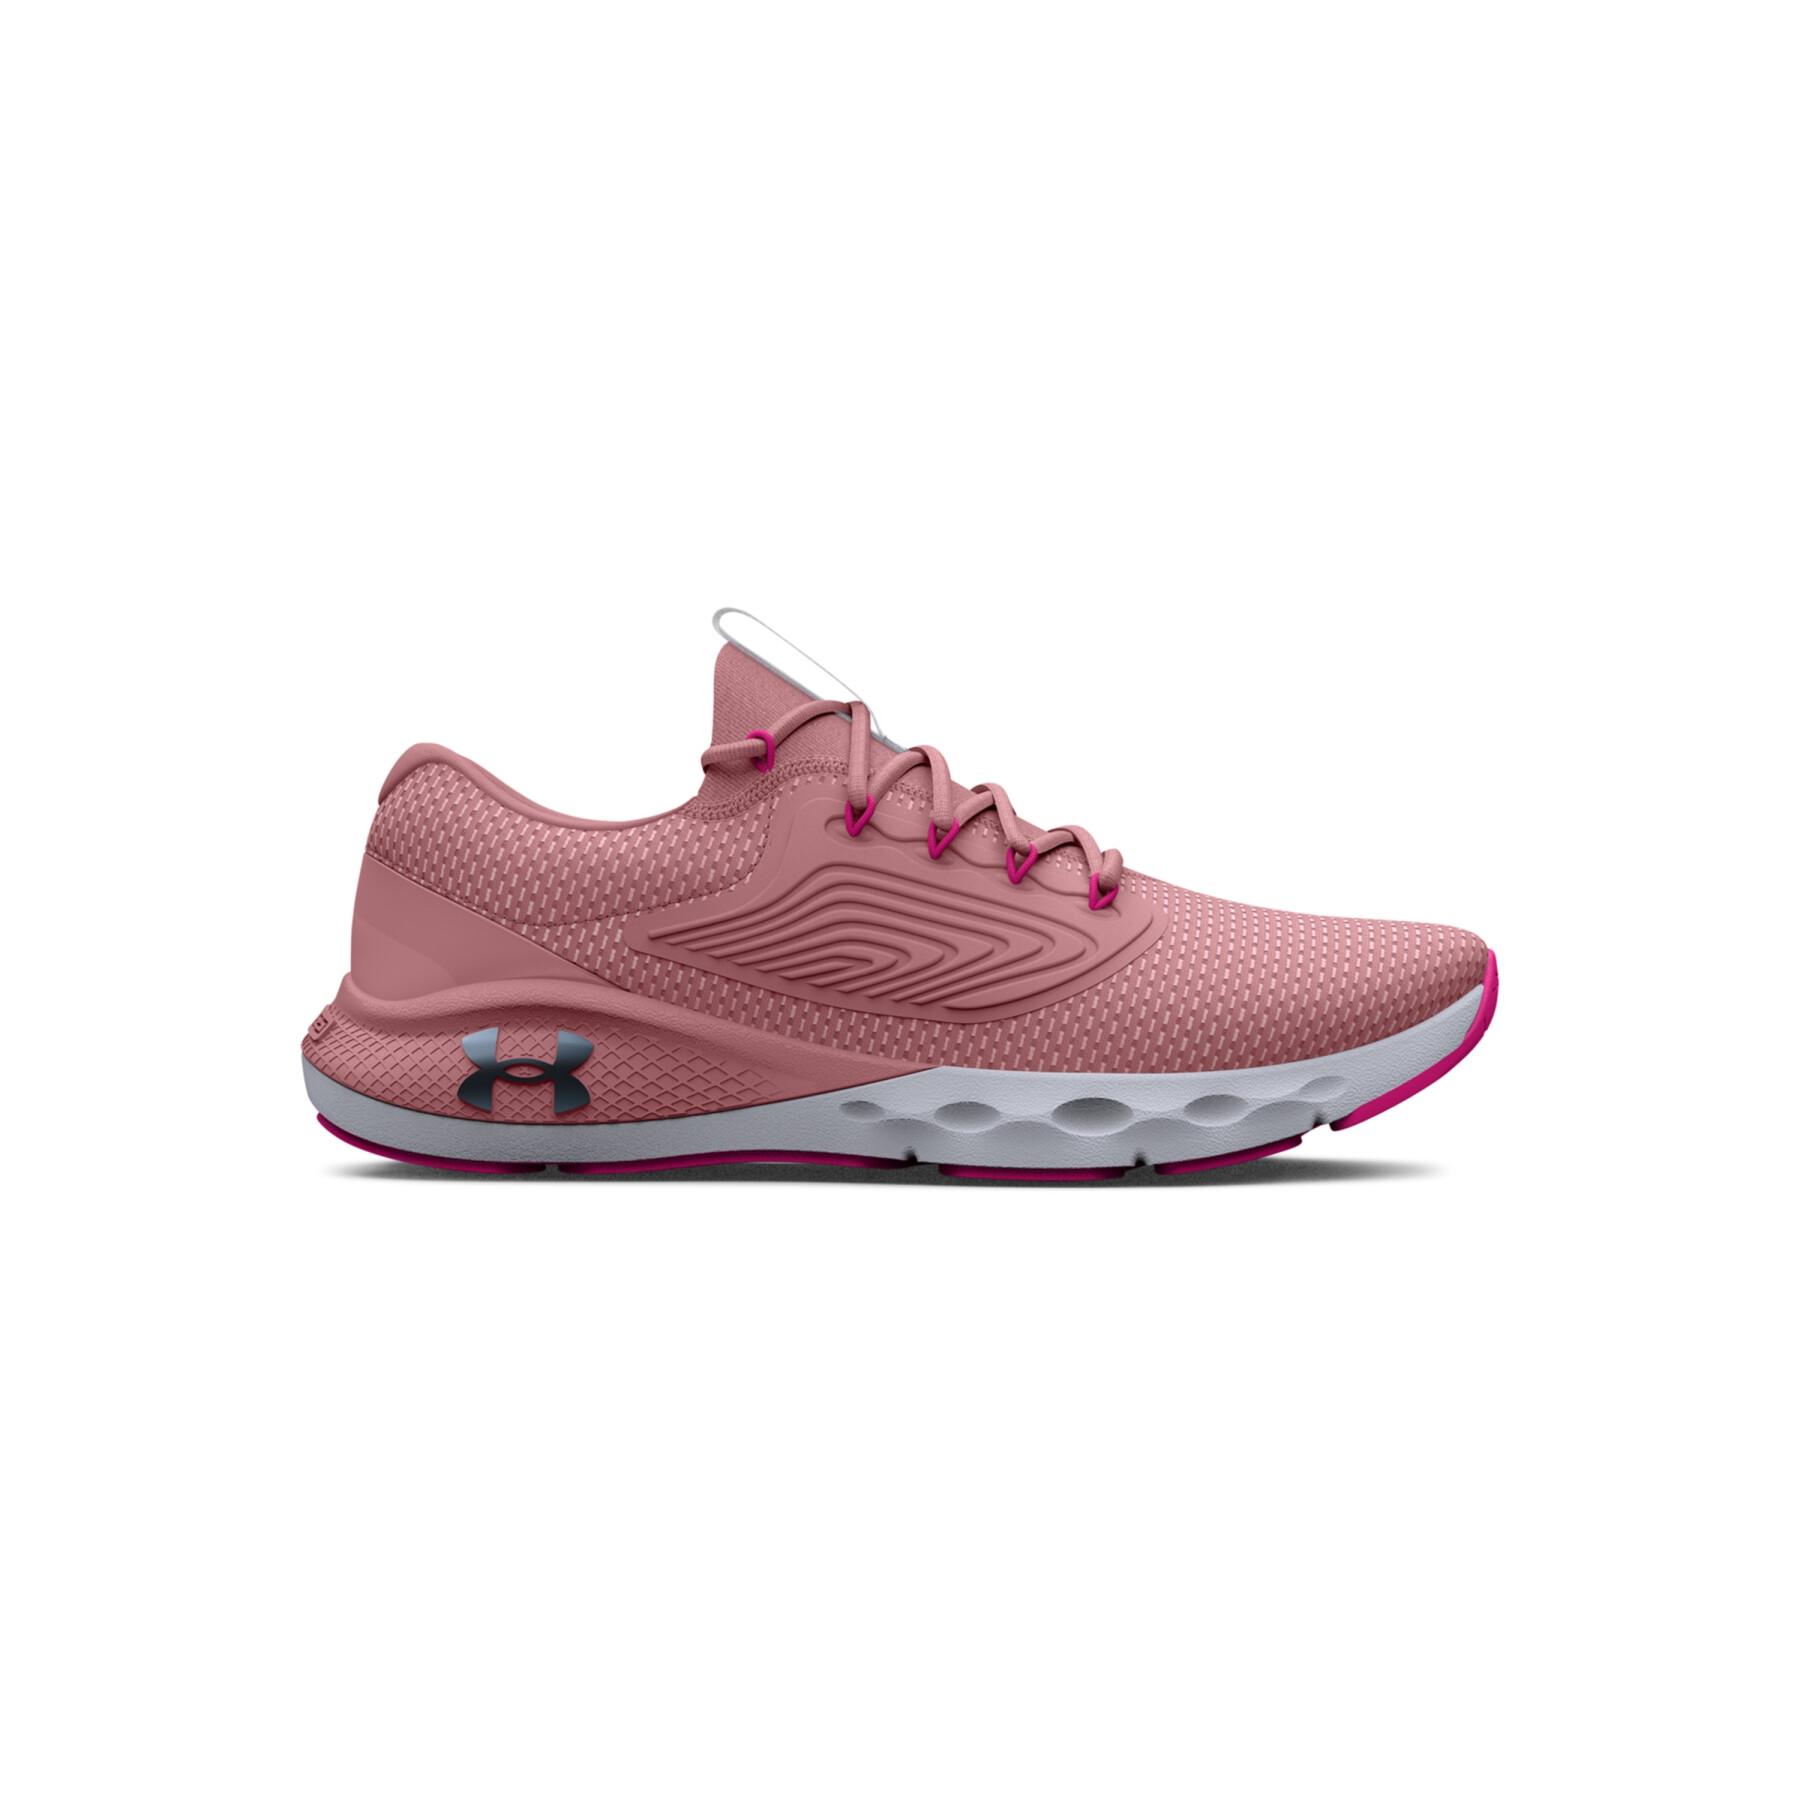 Chaussures de running femme Under Armour Charged Vantage 2